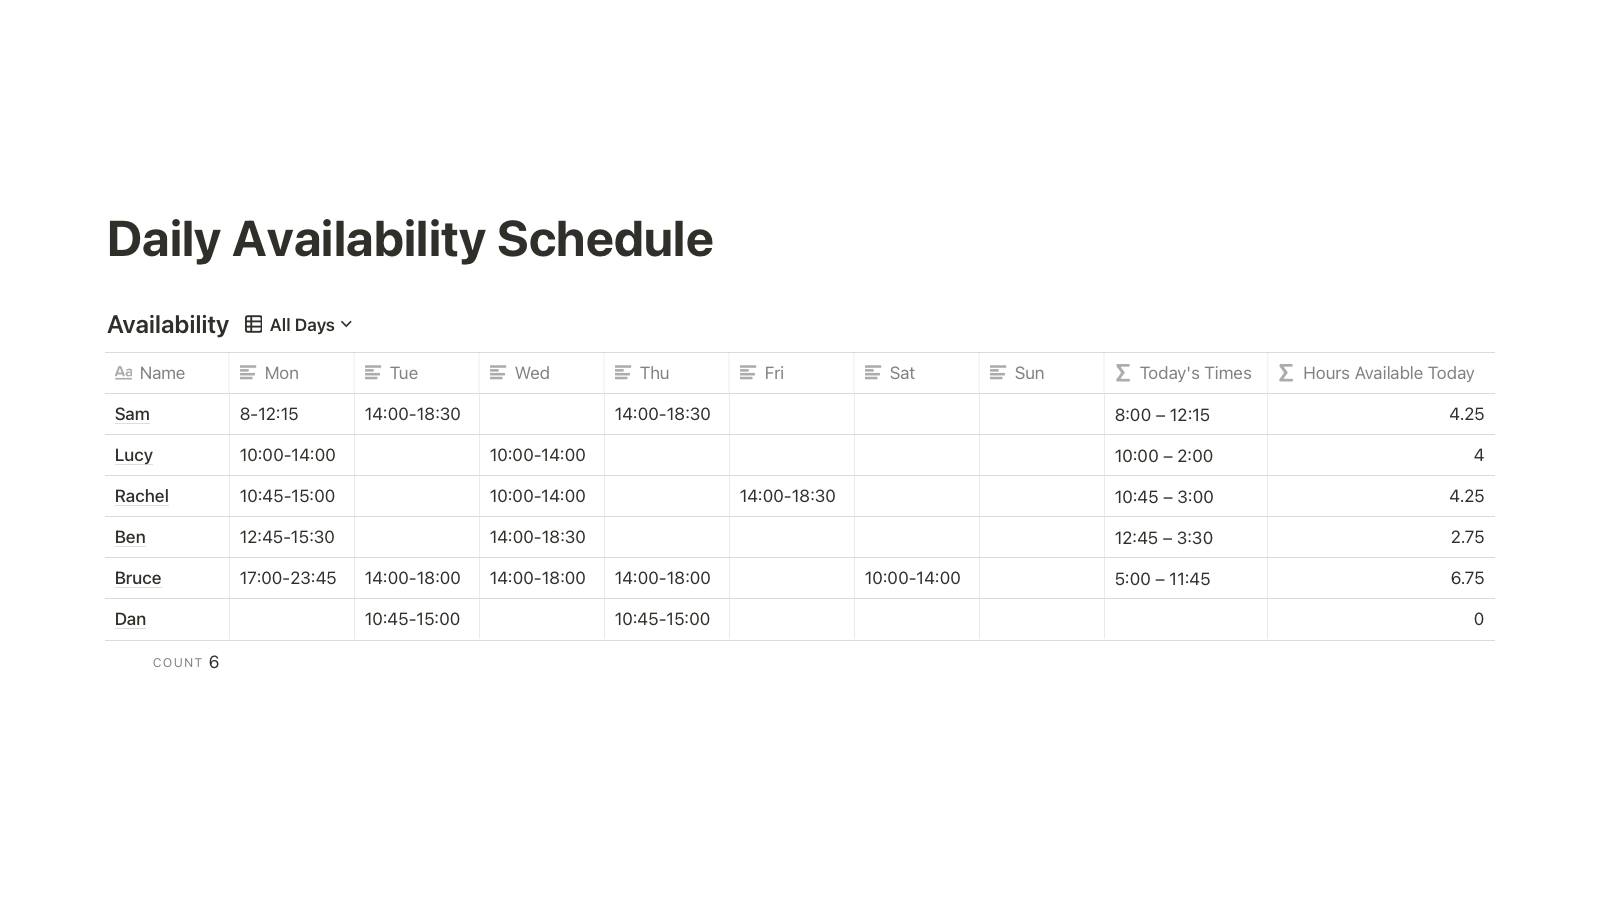 Daily Availability Schedule